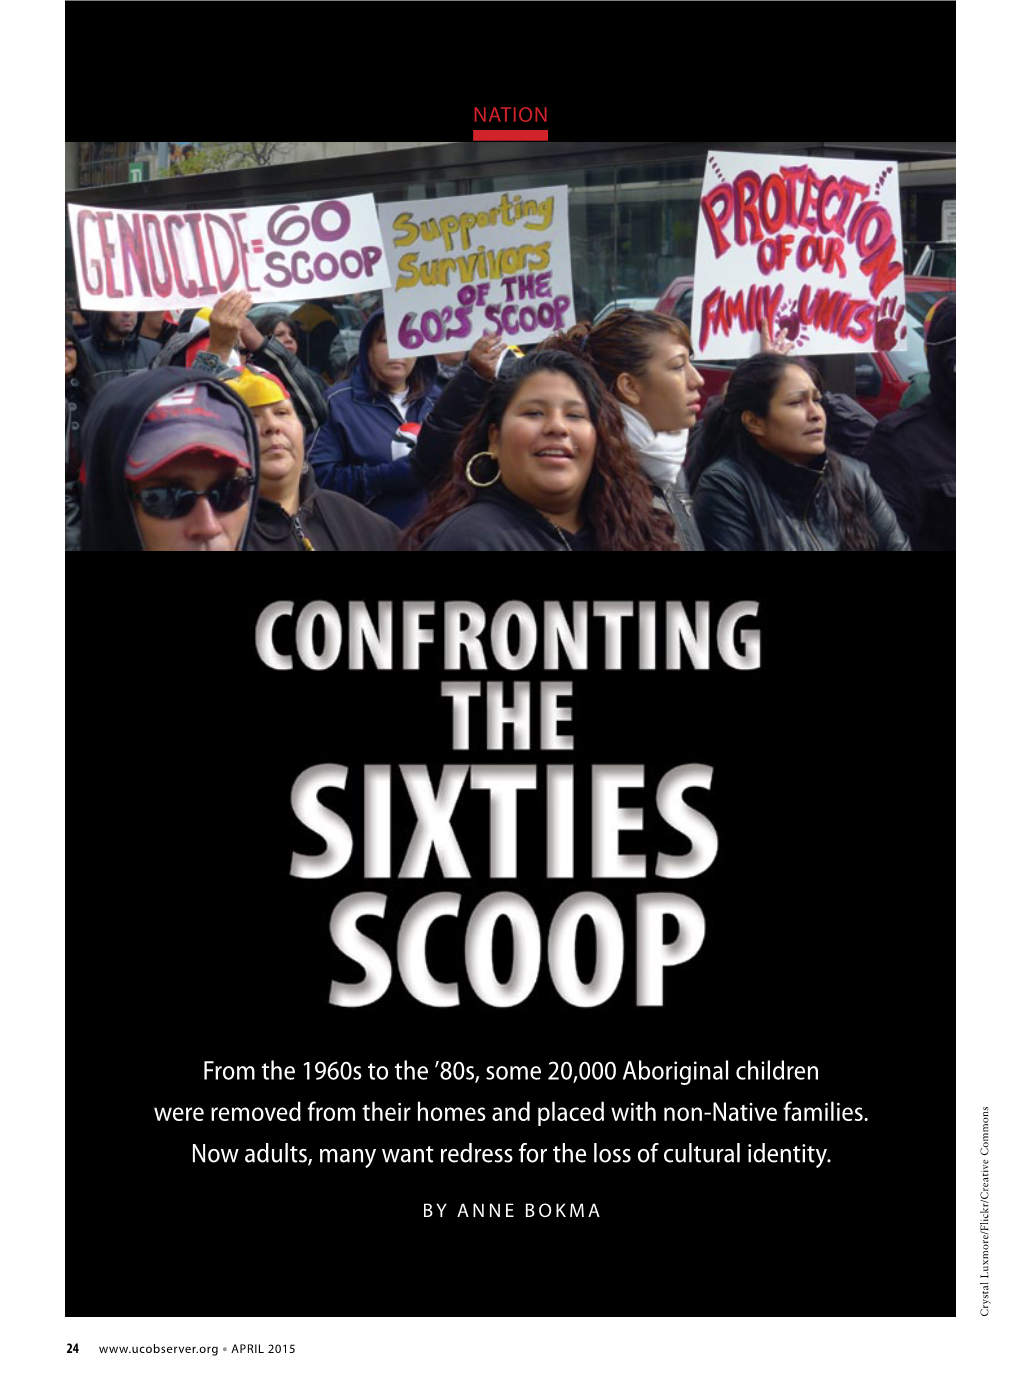 Sixties Scoop” Owes Its Genesis to Marcia (She Is Known As Marcia Brown Martel Today)